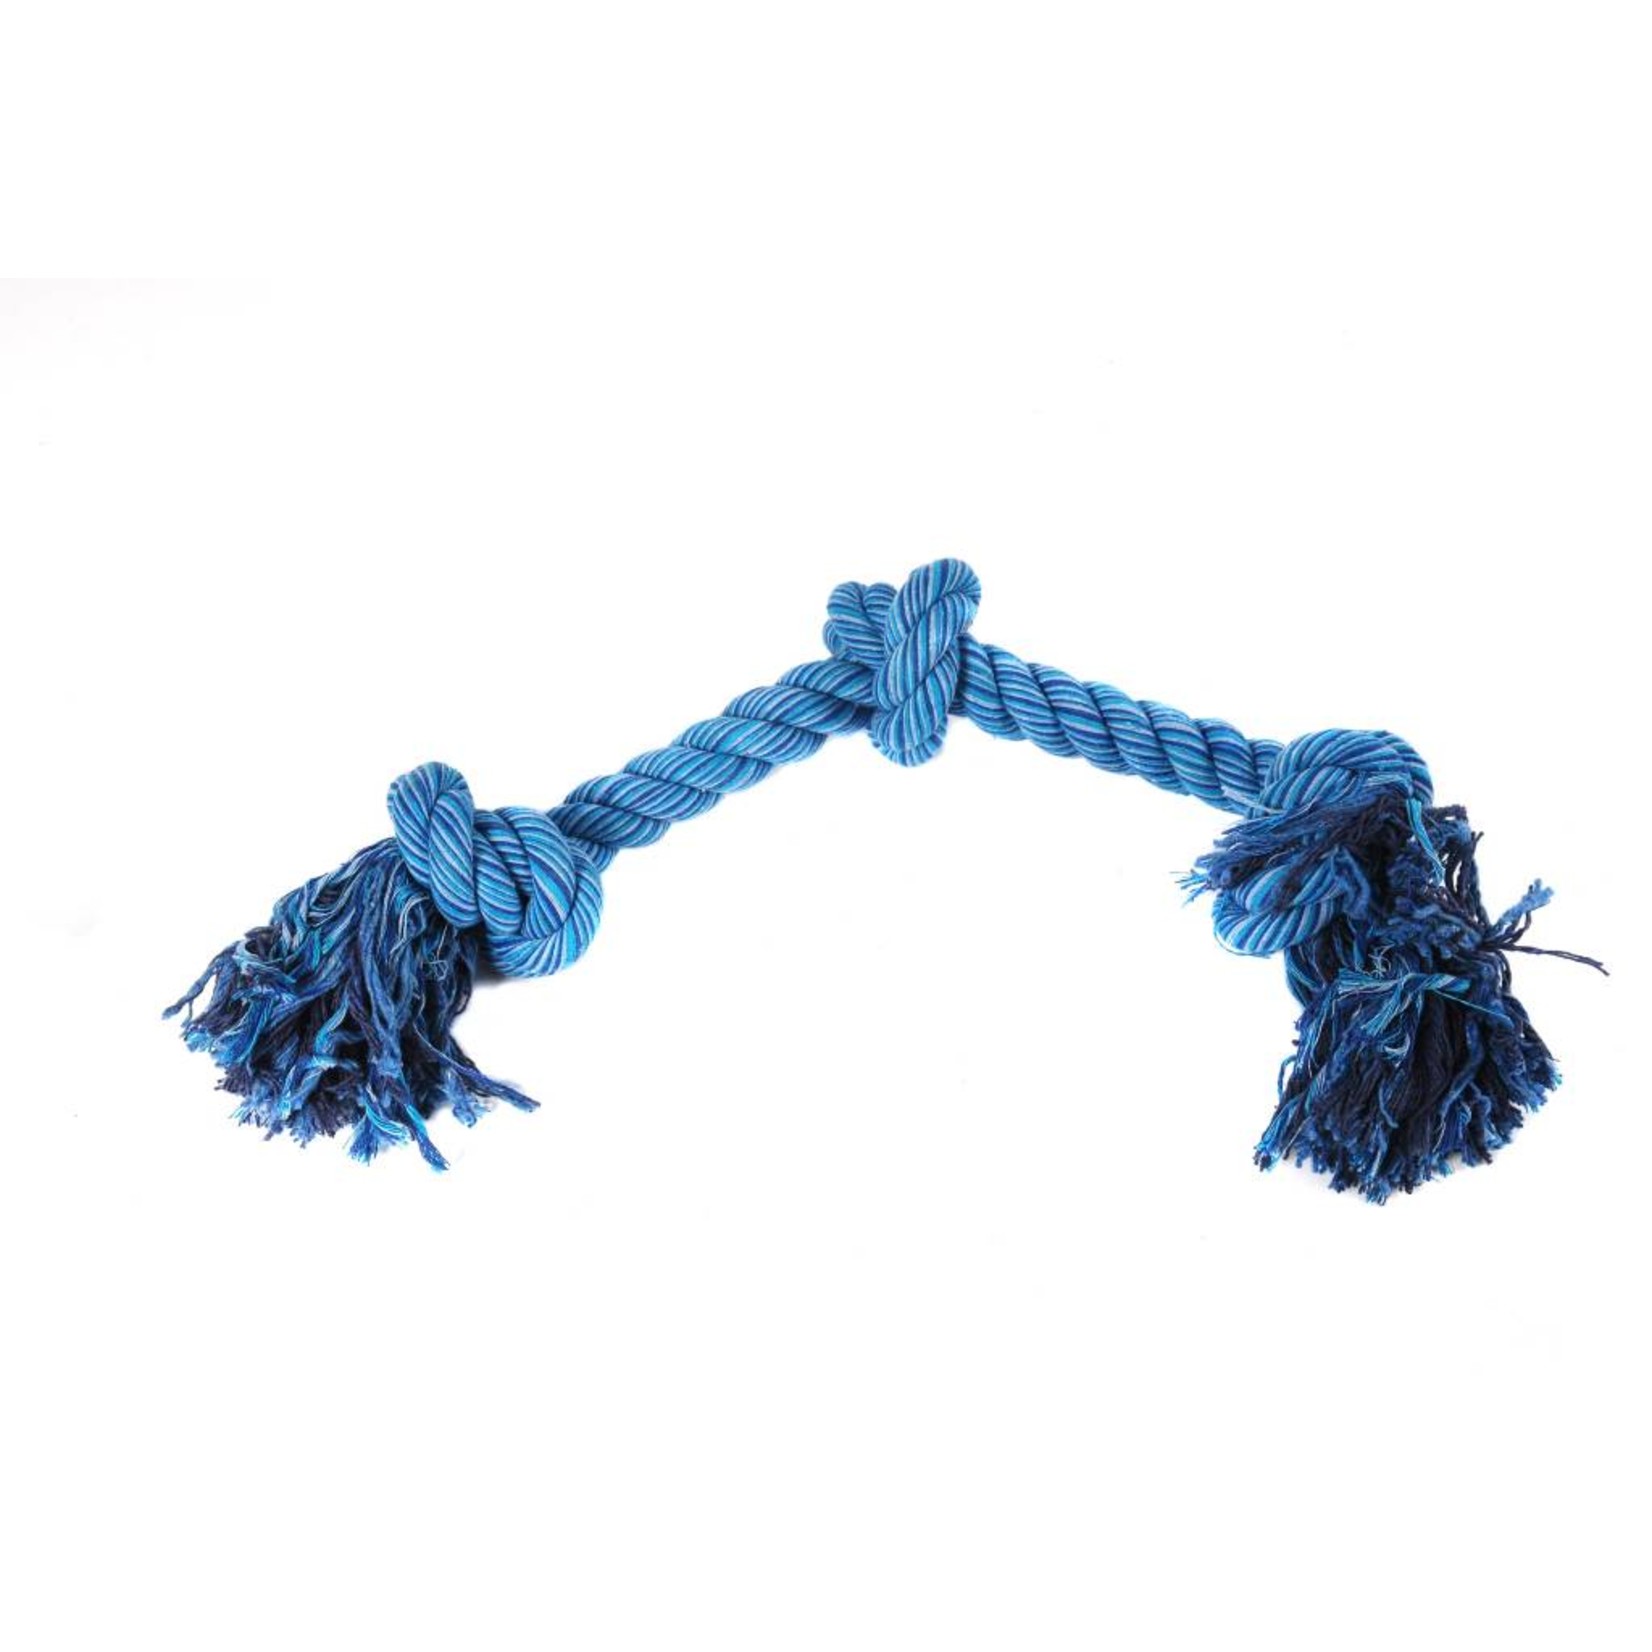 Happy Pet Flossin Fun Rope 3 Knot Dog Toy